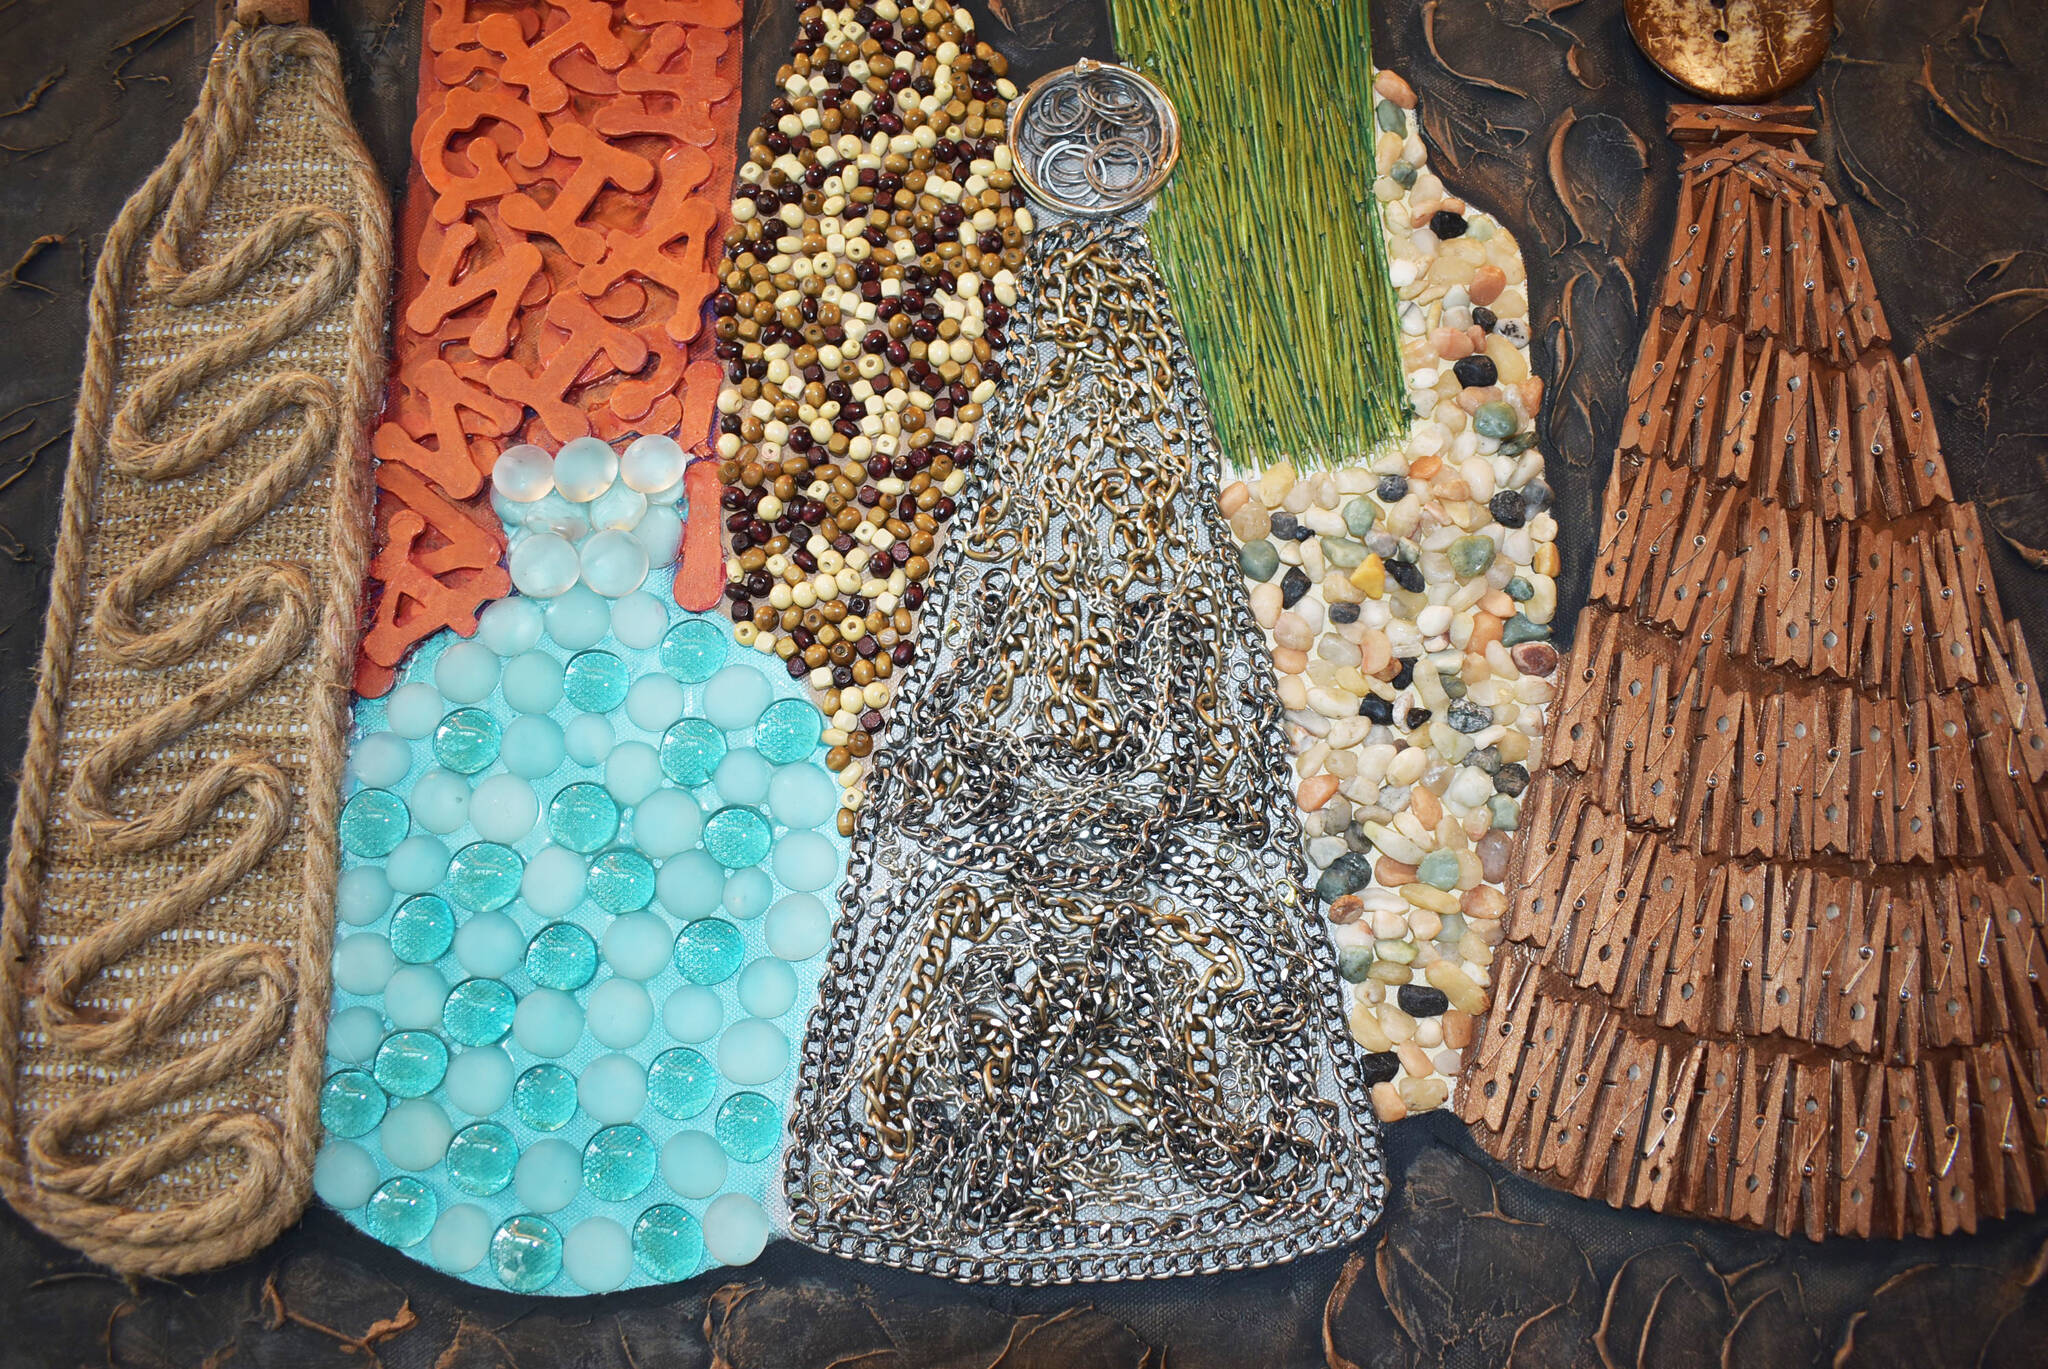 Romo uses random objects to focus on the texture of her artwork.